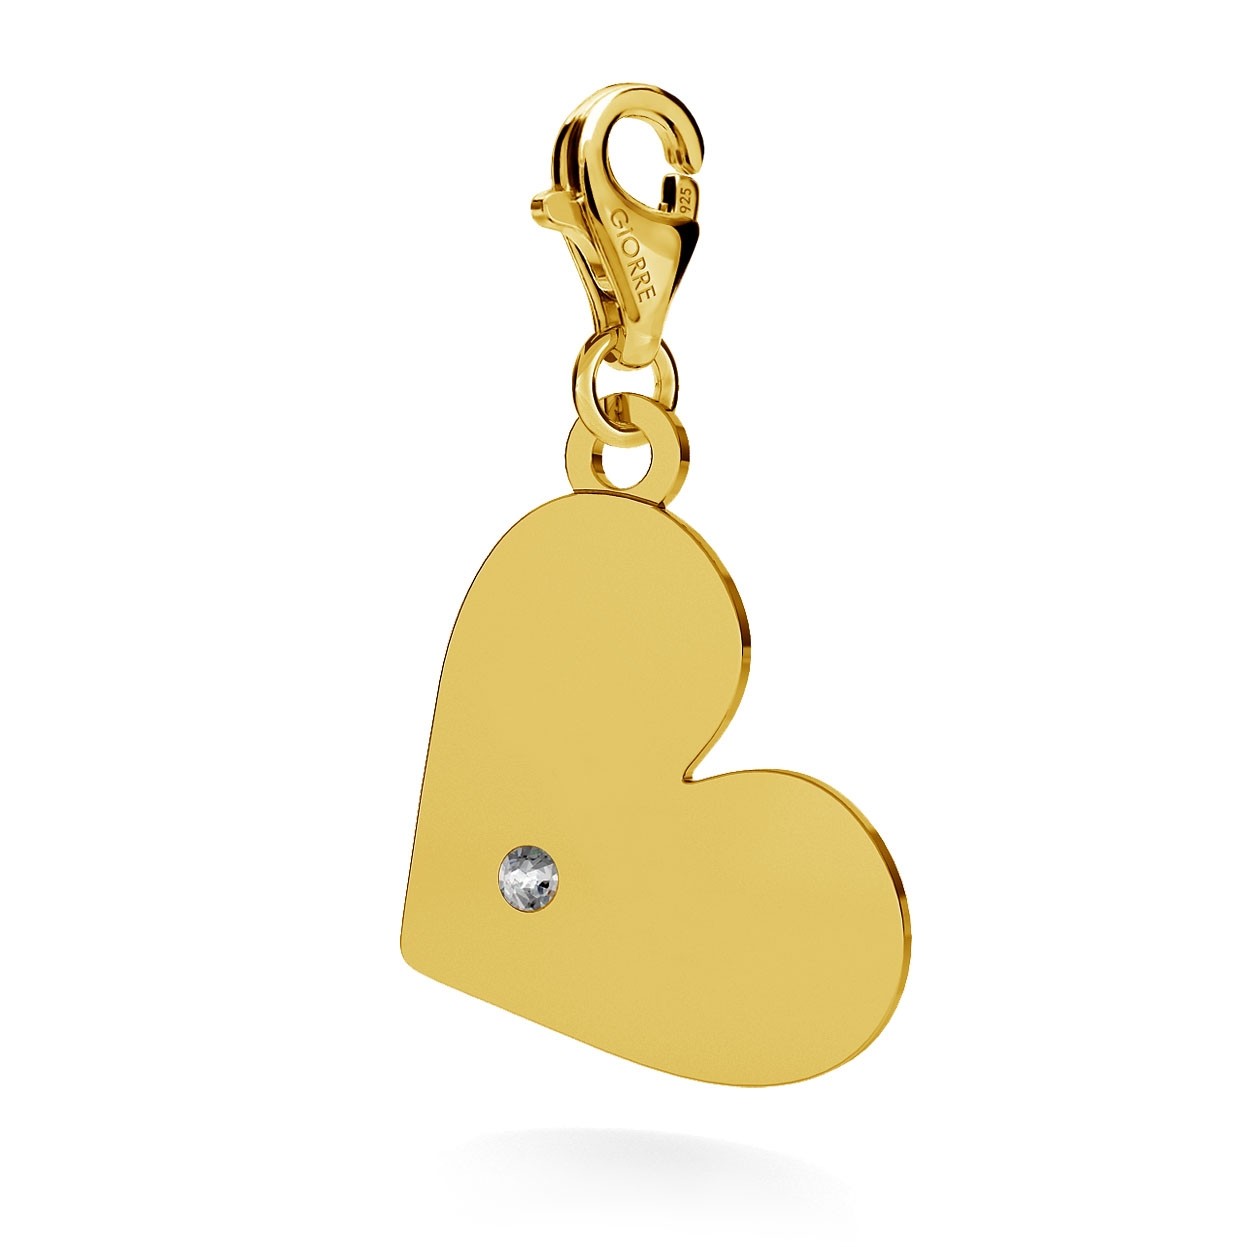 CHARM 101, HEART WITH ENGRAVE, SWAROVSKI 2038 SS 6, STERLING SILVER (925) RHODIUM OR GOLD PLATED